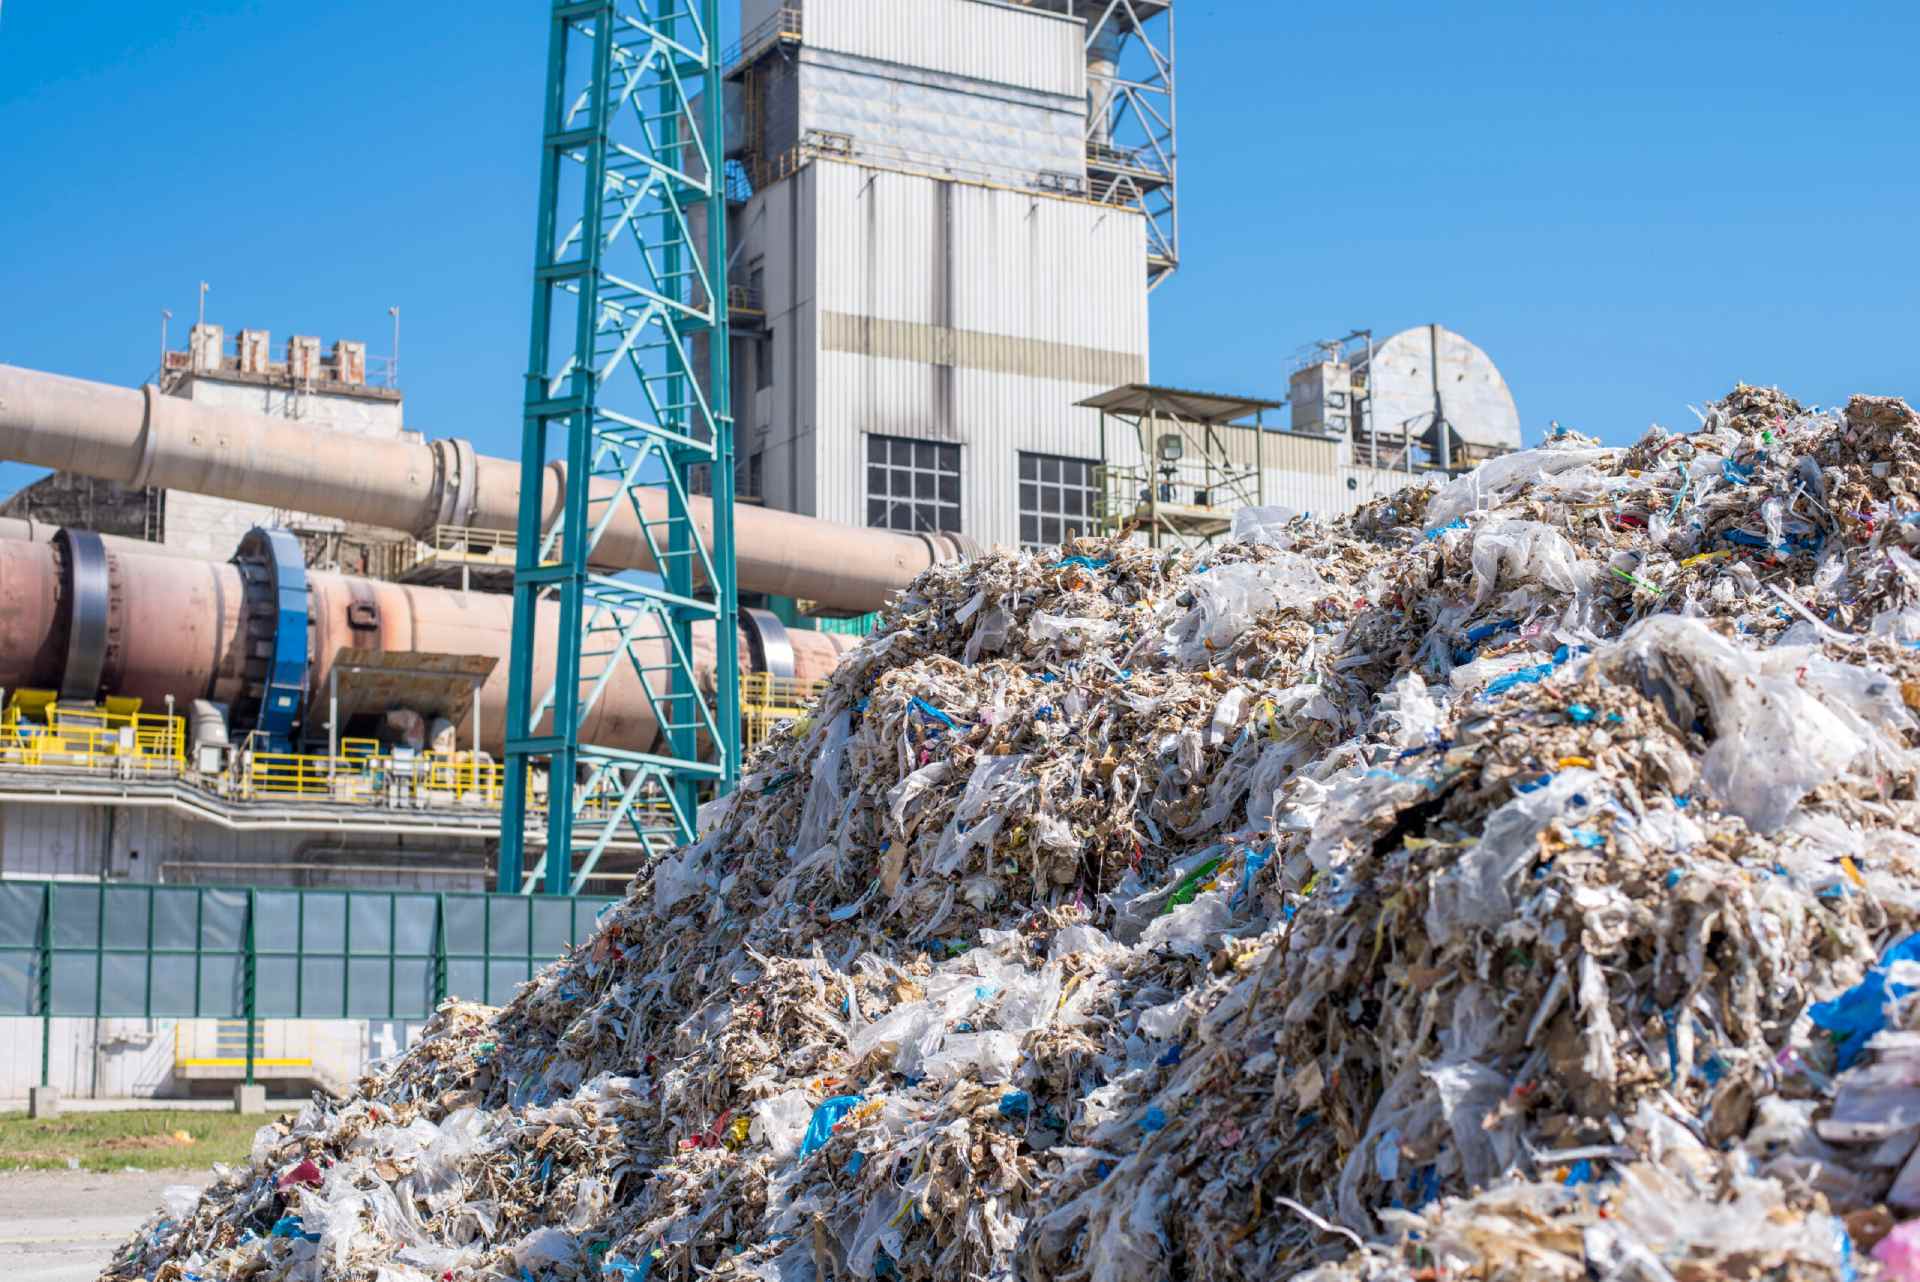 Shredded municipal waste used as alternative fuel and rotary cement kiln in the background